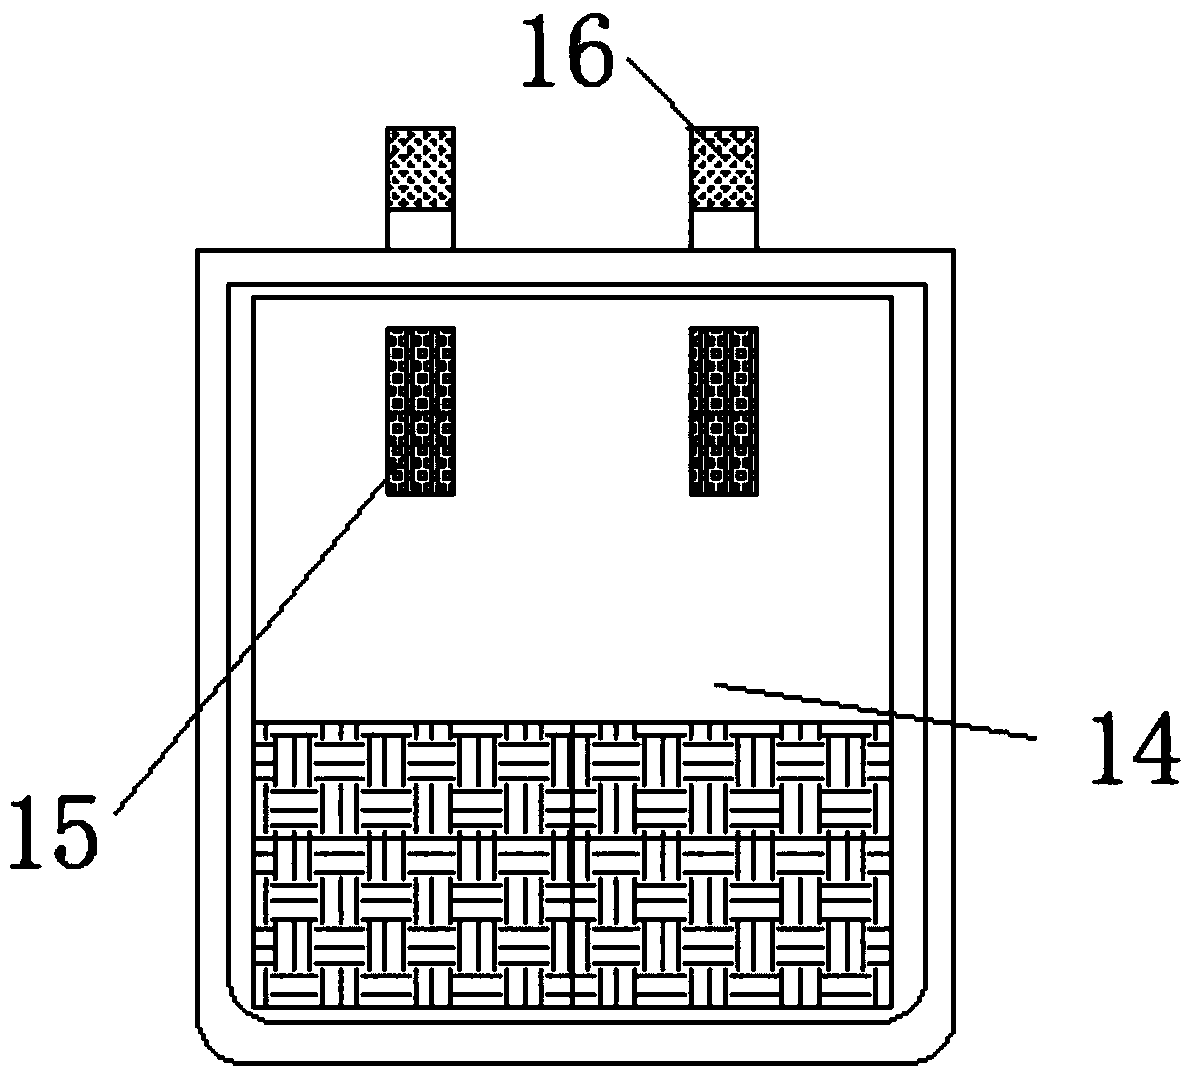 Endocrine diabetic treatment device and a use method thereof